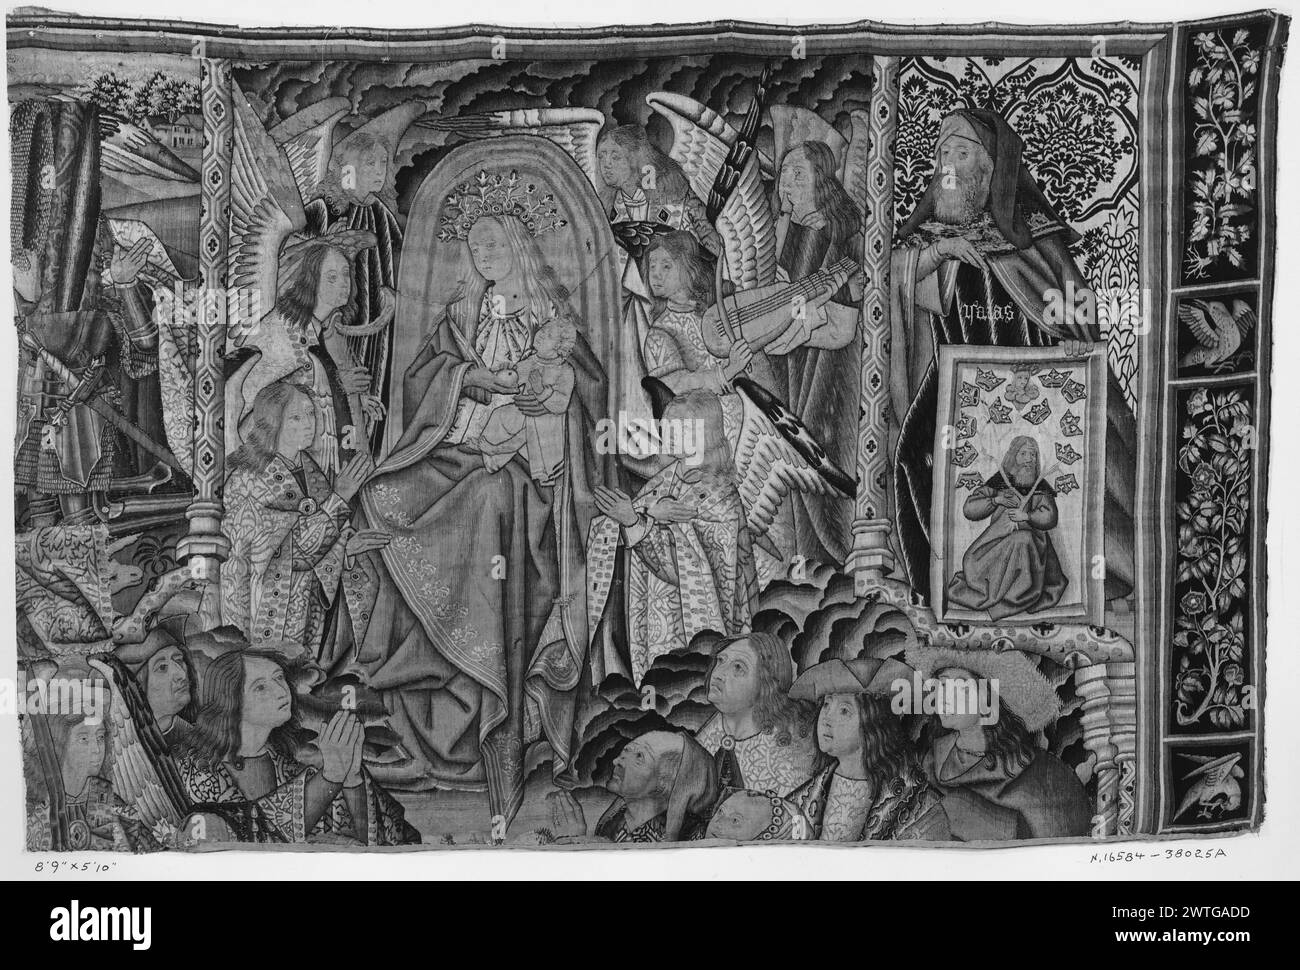 Glorification of Virgin Mary. unknown c. 1500-1510 Tapestry Dimensions: H 5'10" x W 8' (left half of top portion) Tapestry Materials/Techniques: unknown Culture: Southern Netherlands Ownership History: Bramshill chapel; sold, London Sotheby's, 3/13/1931. French & Co. purchased from Spanish Art Galleries, invoiced 3/16/1931. Scotland, Lanark, Glasgow, Burrell Collection. Inscriptions: Inscription in central field on plaque held by man right of center on GCPA 0239472: O DULCE MARIA Inscriptions: Inscription in central field on banderole held by man in lower center on GCPA 0239472: [O] PIA Inscri Stock Photo